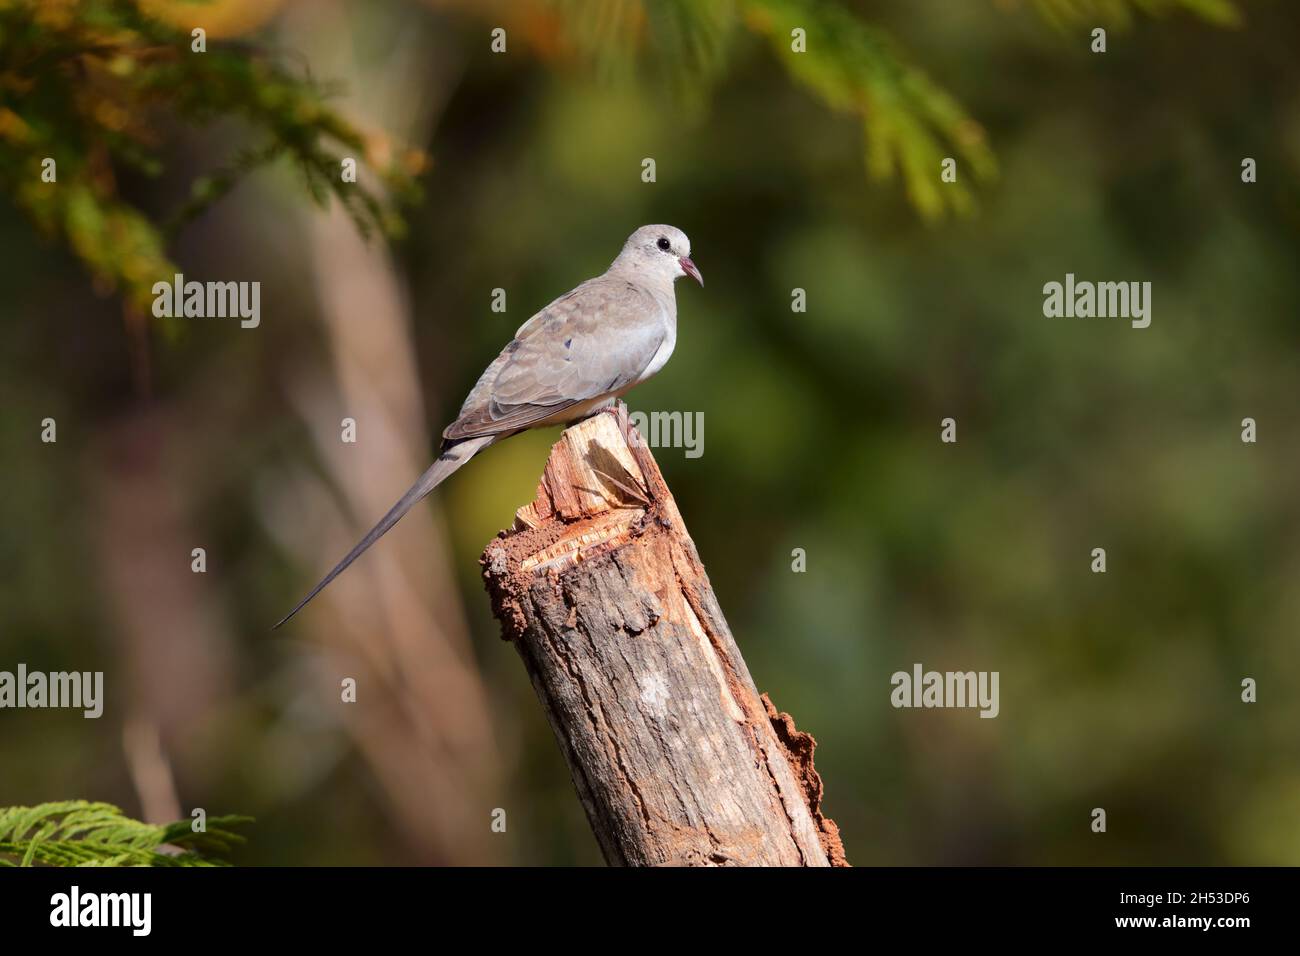 An adult female Namaqua dove (Oena capensis) perched on a tree stump in the Gambia, West Africa Stock Photo